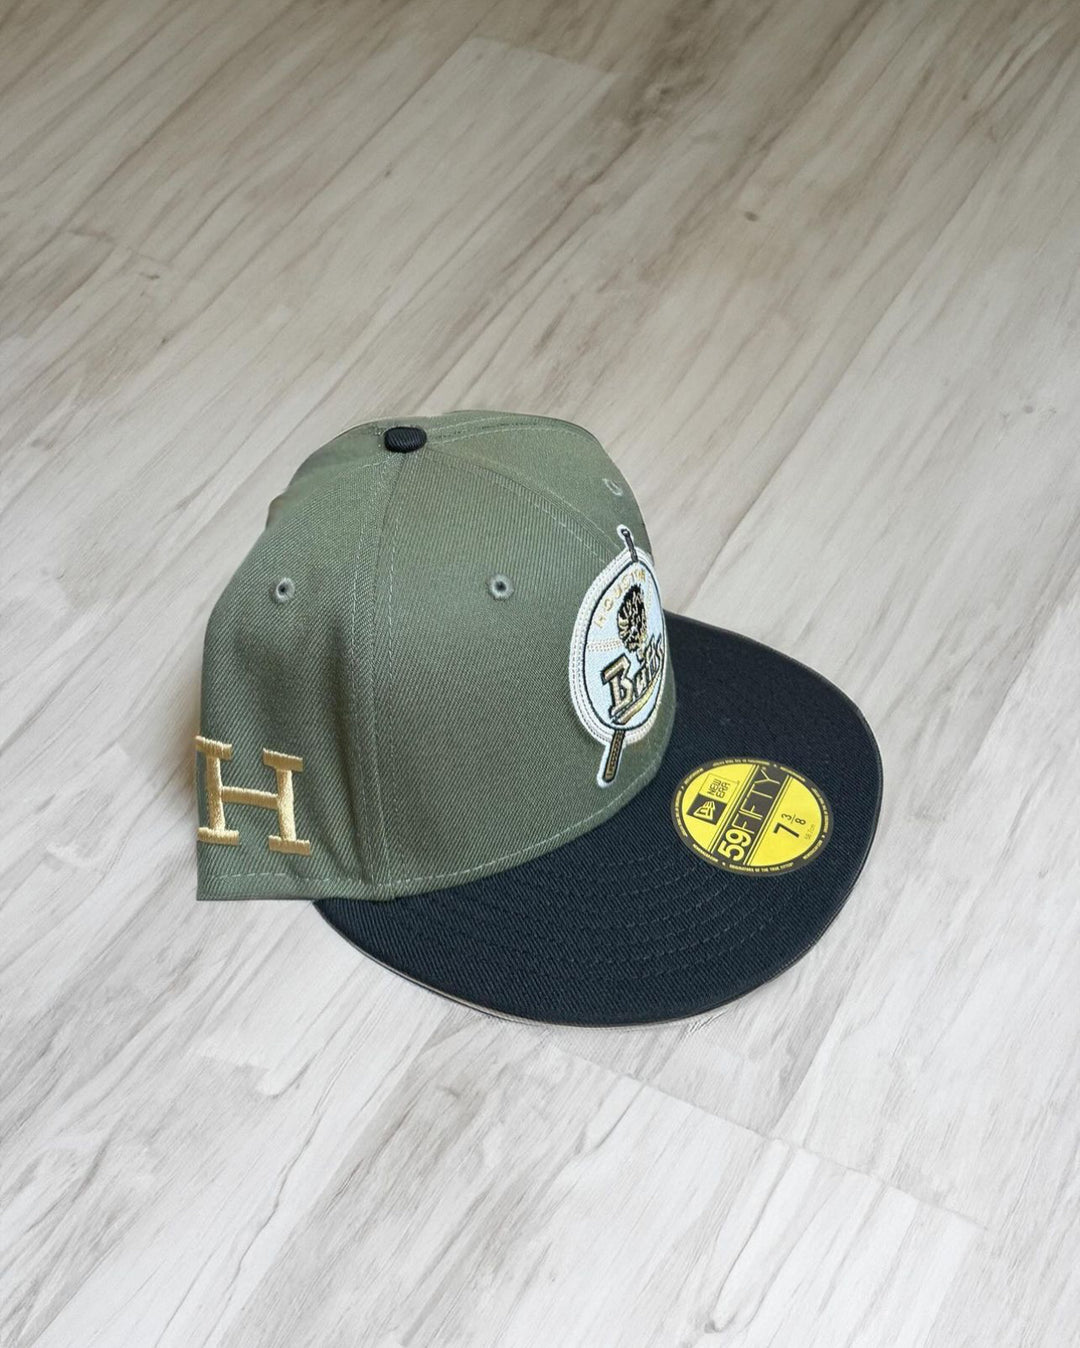 Houston Buffs 59FIFTY Fitted Cap - Black/Olive